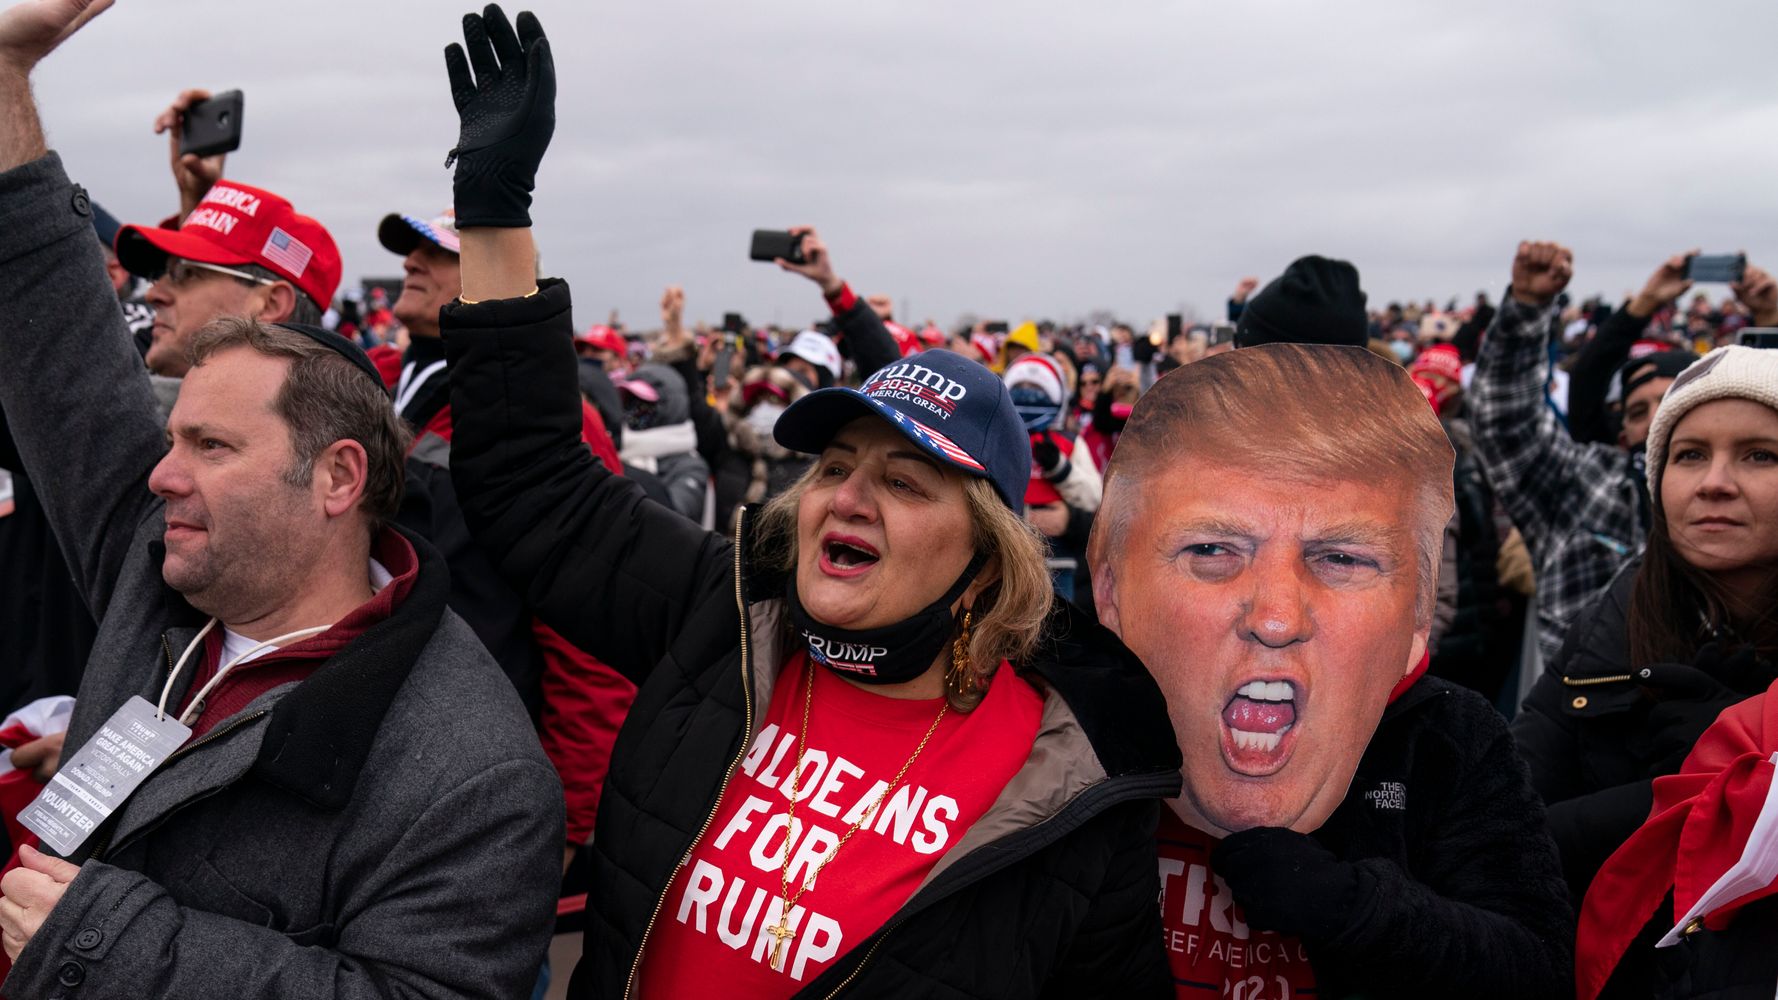 Trump’s Rallies Didn’t Pay Off For Him At The Polls, According To Data